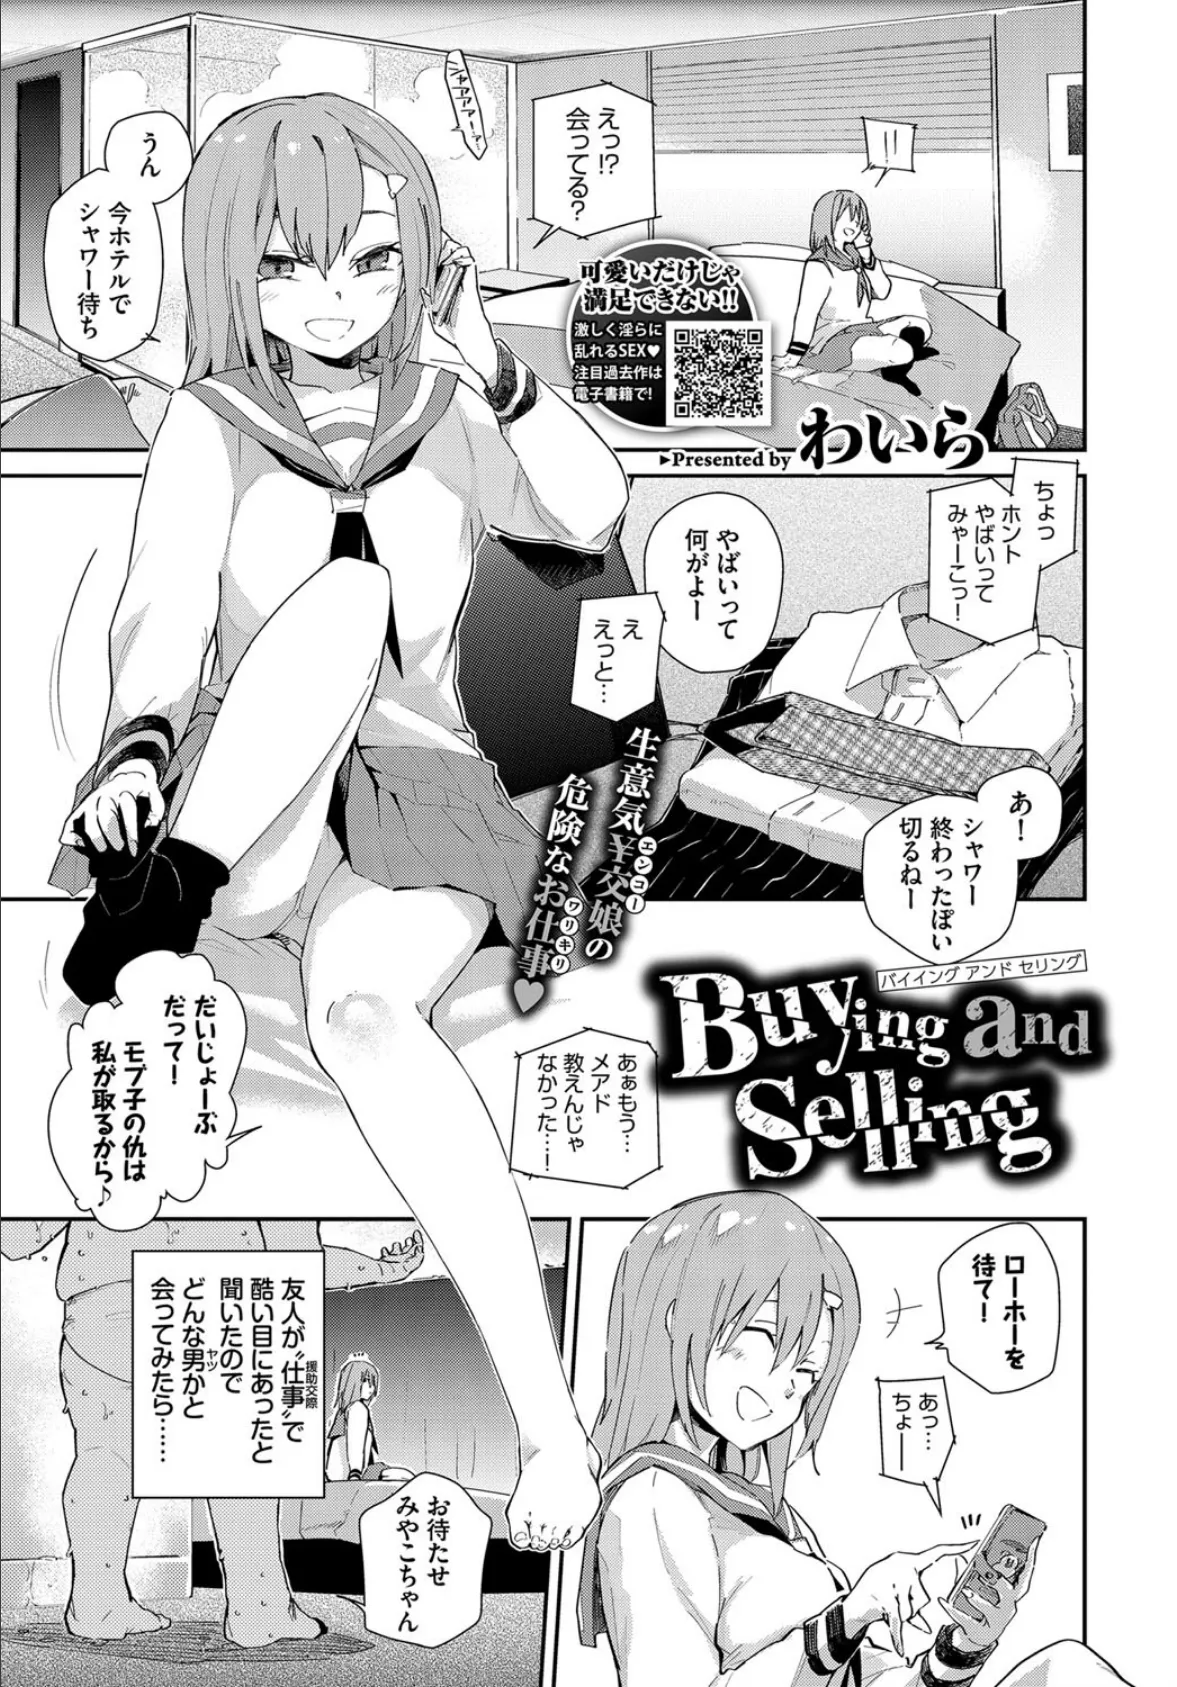 Buying and Selling 1ページ